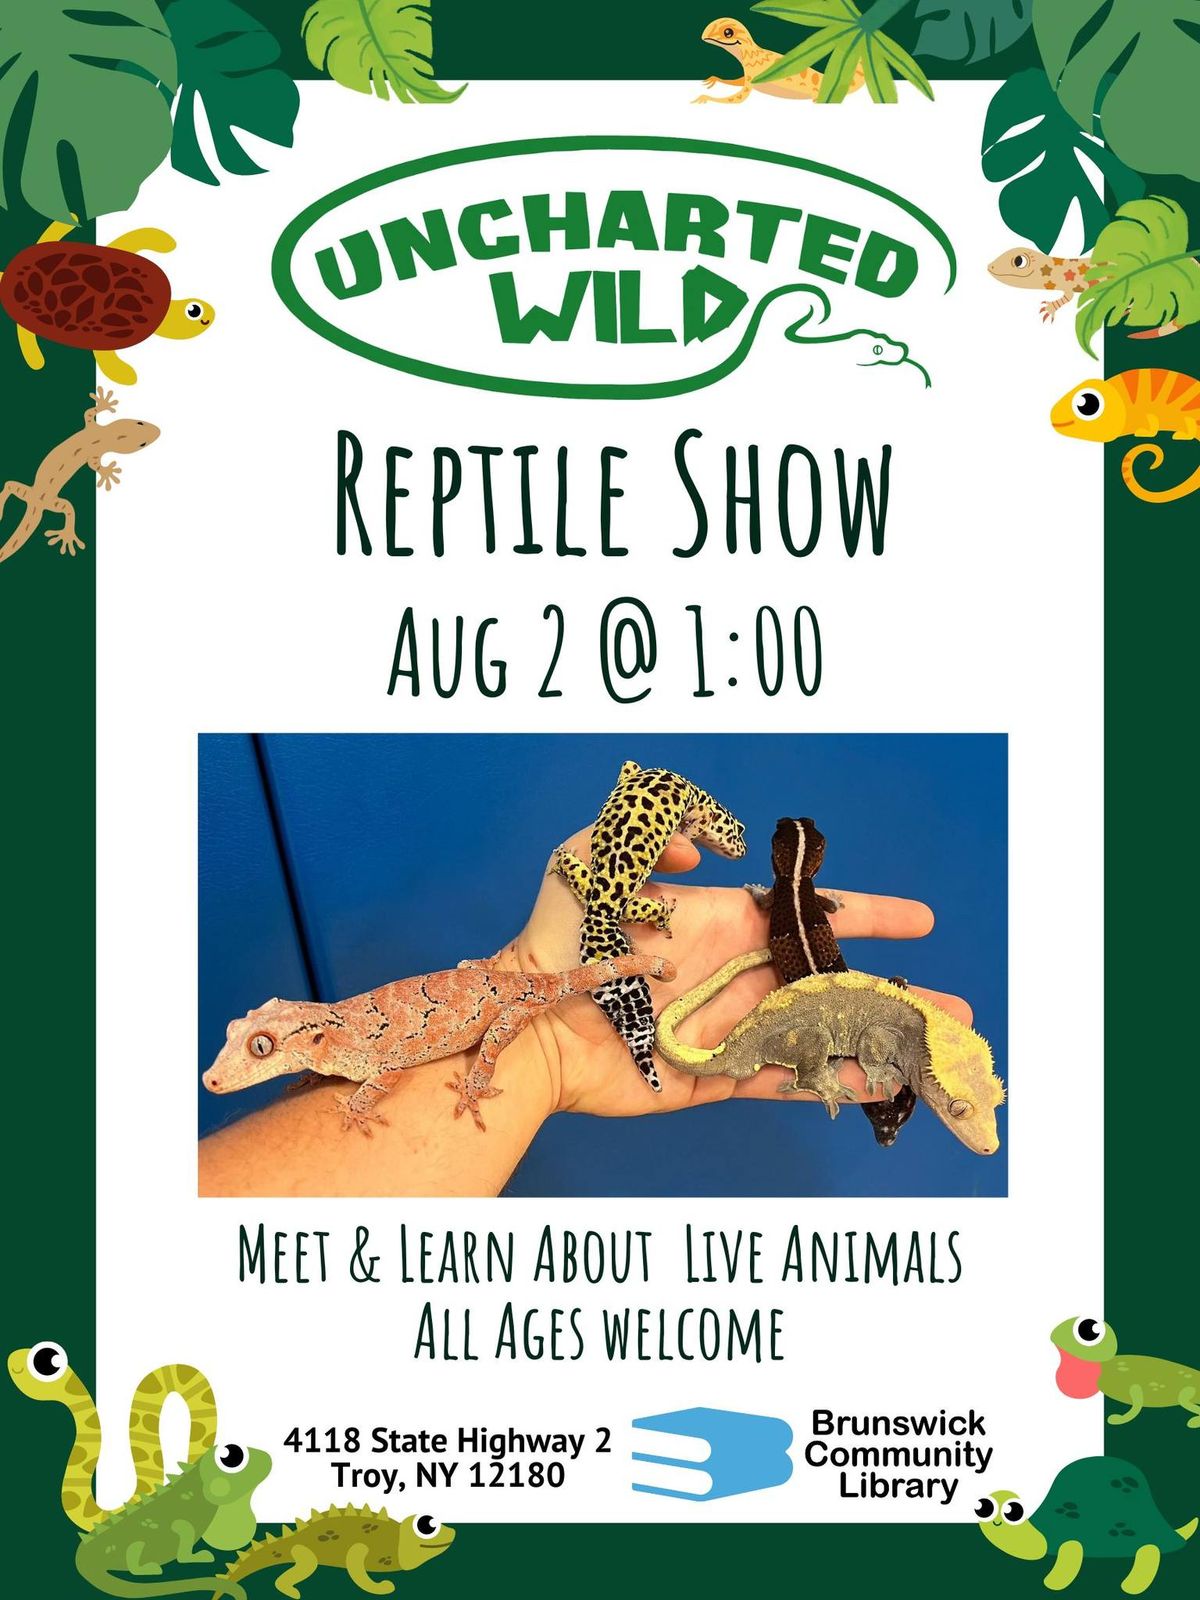 Reptile Show with Uncharted Wild